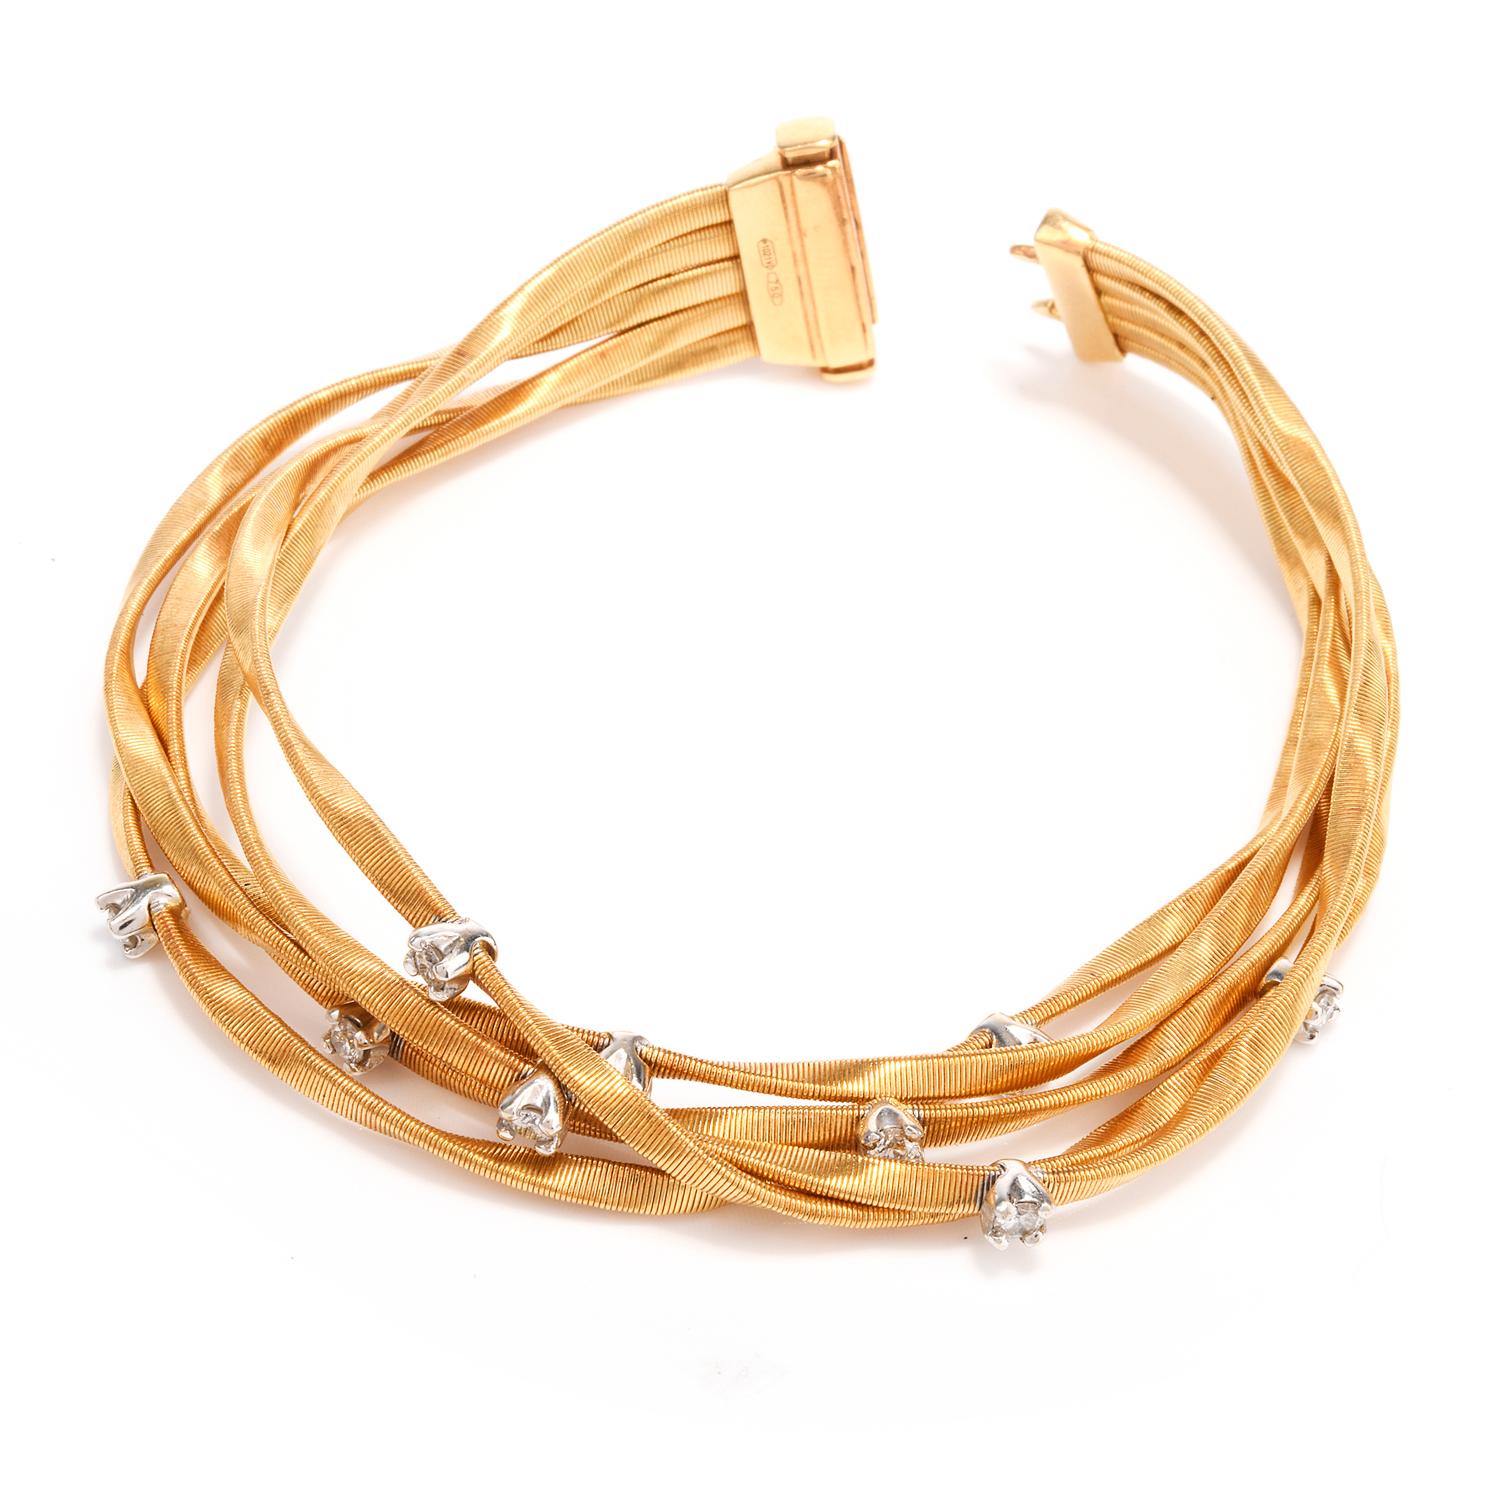 Designer Marco Bicego was inspired with a twisted coiled wire

design and crafted this in 18K yellow Gold.

With 5 strands stretched across the arm, each are accented 

with bright white round brilliant cut diamonds.

9 diamonds weigh appx. 0.63